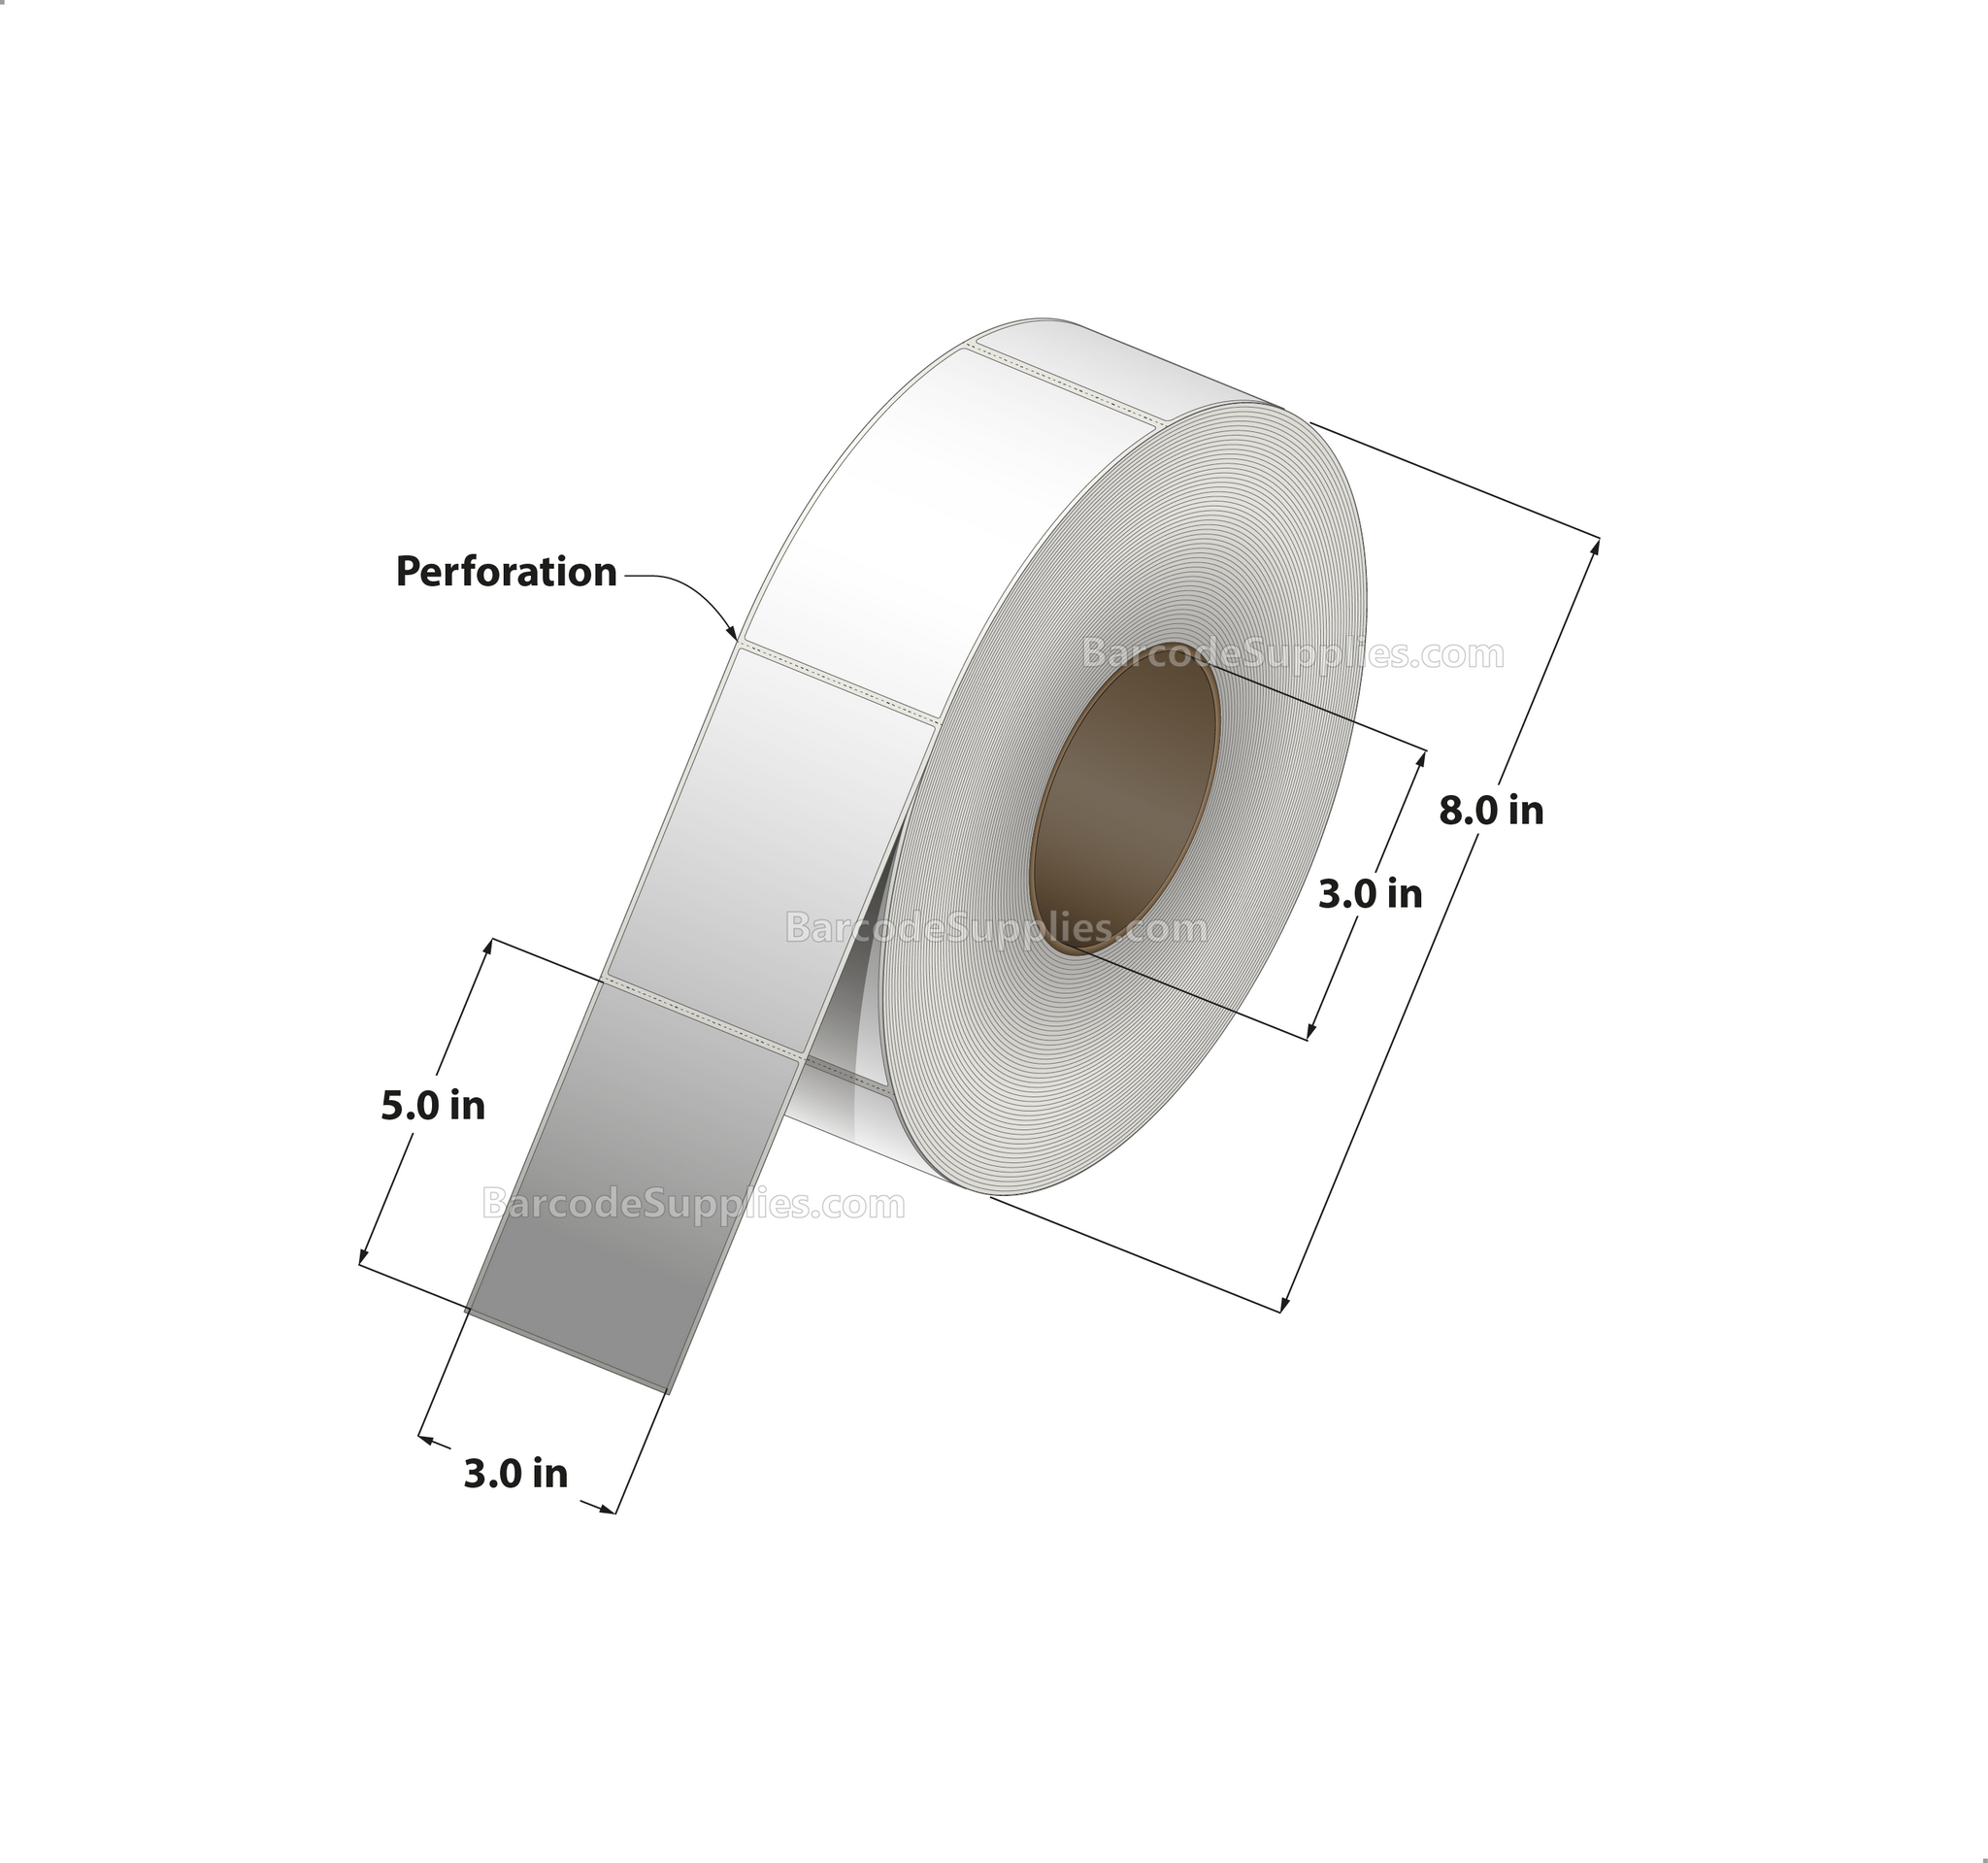 3 x 5 Thermal Transfer White Labels With Rubber Adhesive - Perforated - 1300 Labels Per Roll - Carton Of 6 Rolls - 7800 Labels Total - MPN: CTT300500-3P